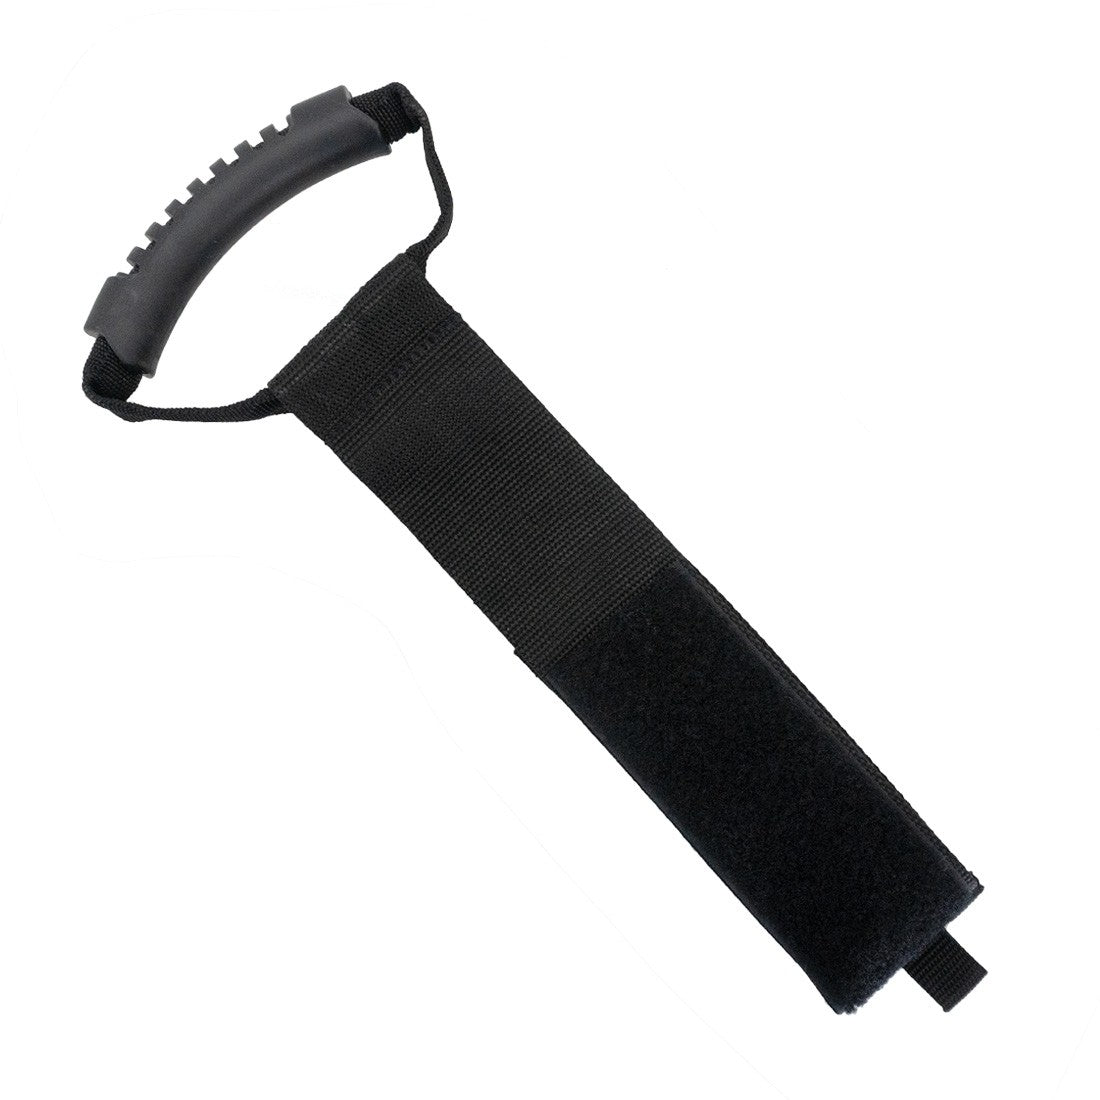 Wrap-It Easy-Carry Storage Strap - 28 Inch Bottom Left Angle View